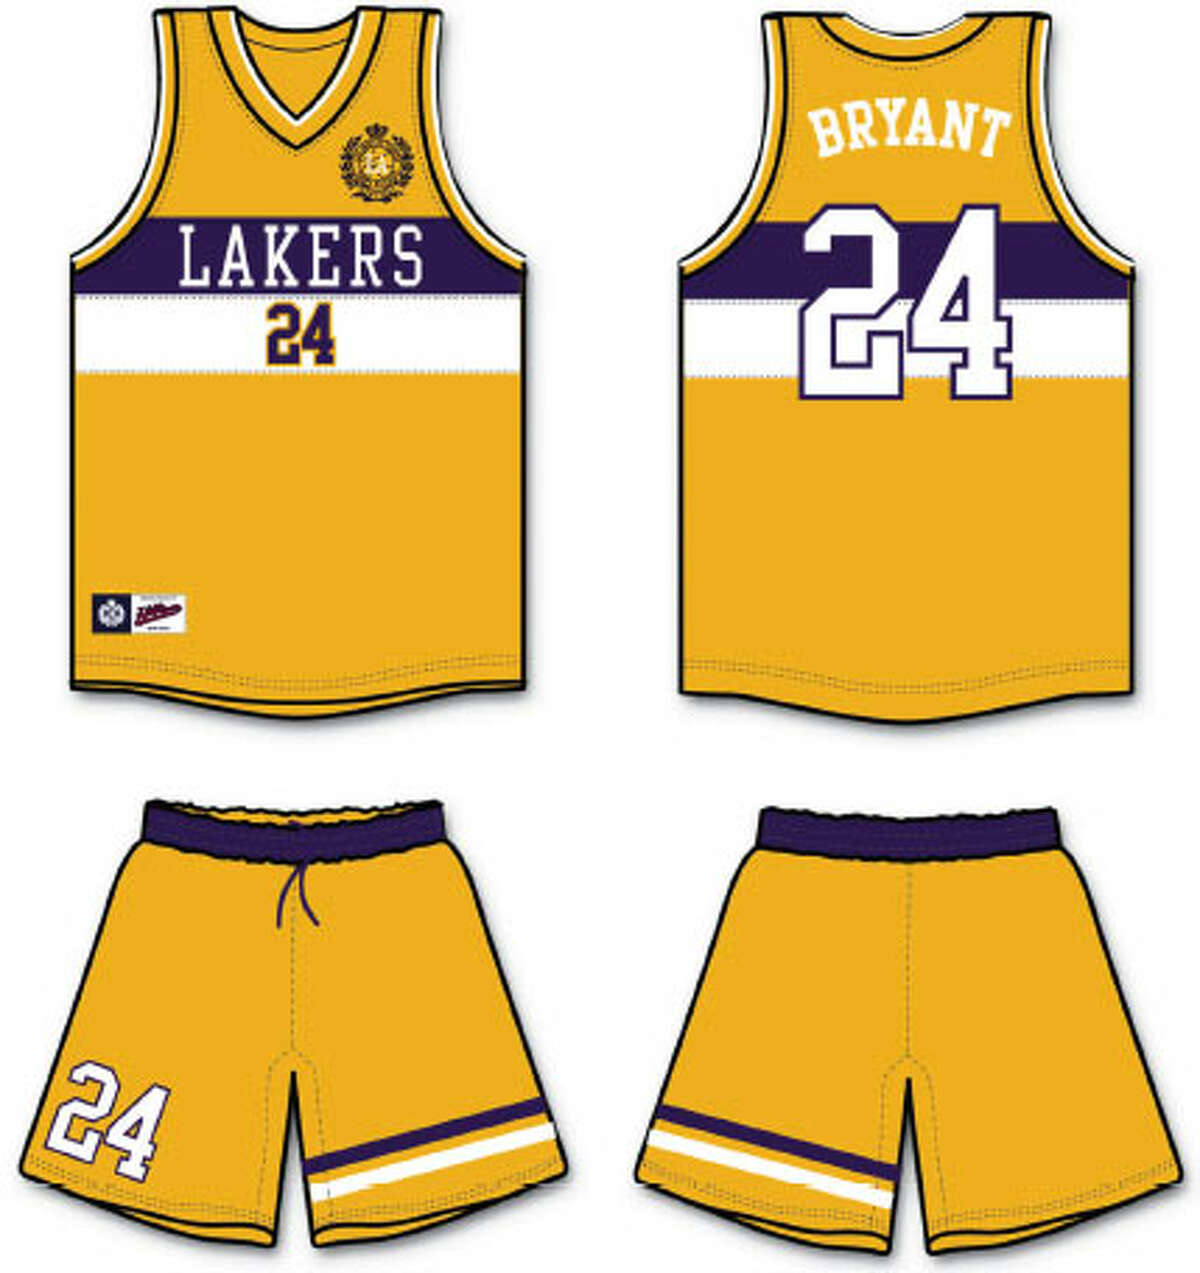 Tommy Hilfiger redesigns the L.A. Lakers uniform for ESPN the Magazine. COURTESY ESPN THE MAGAZINE